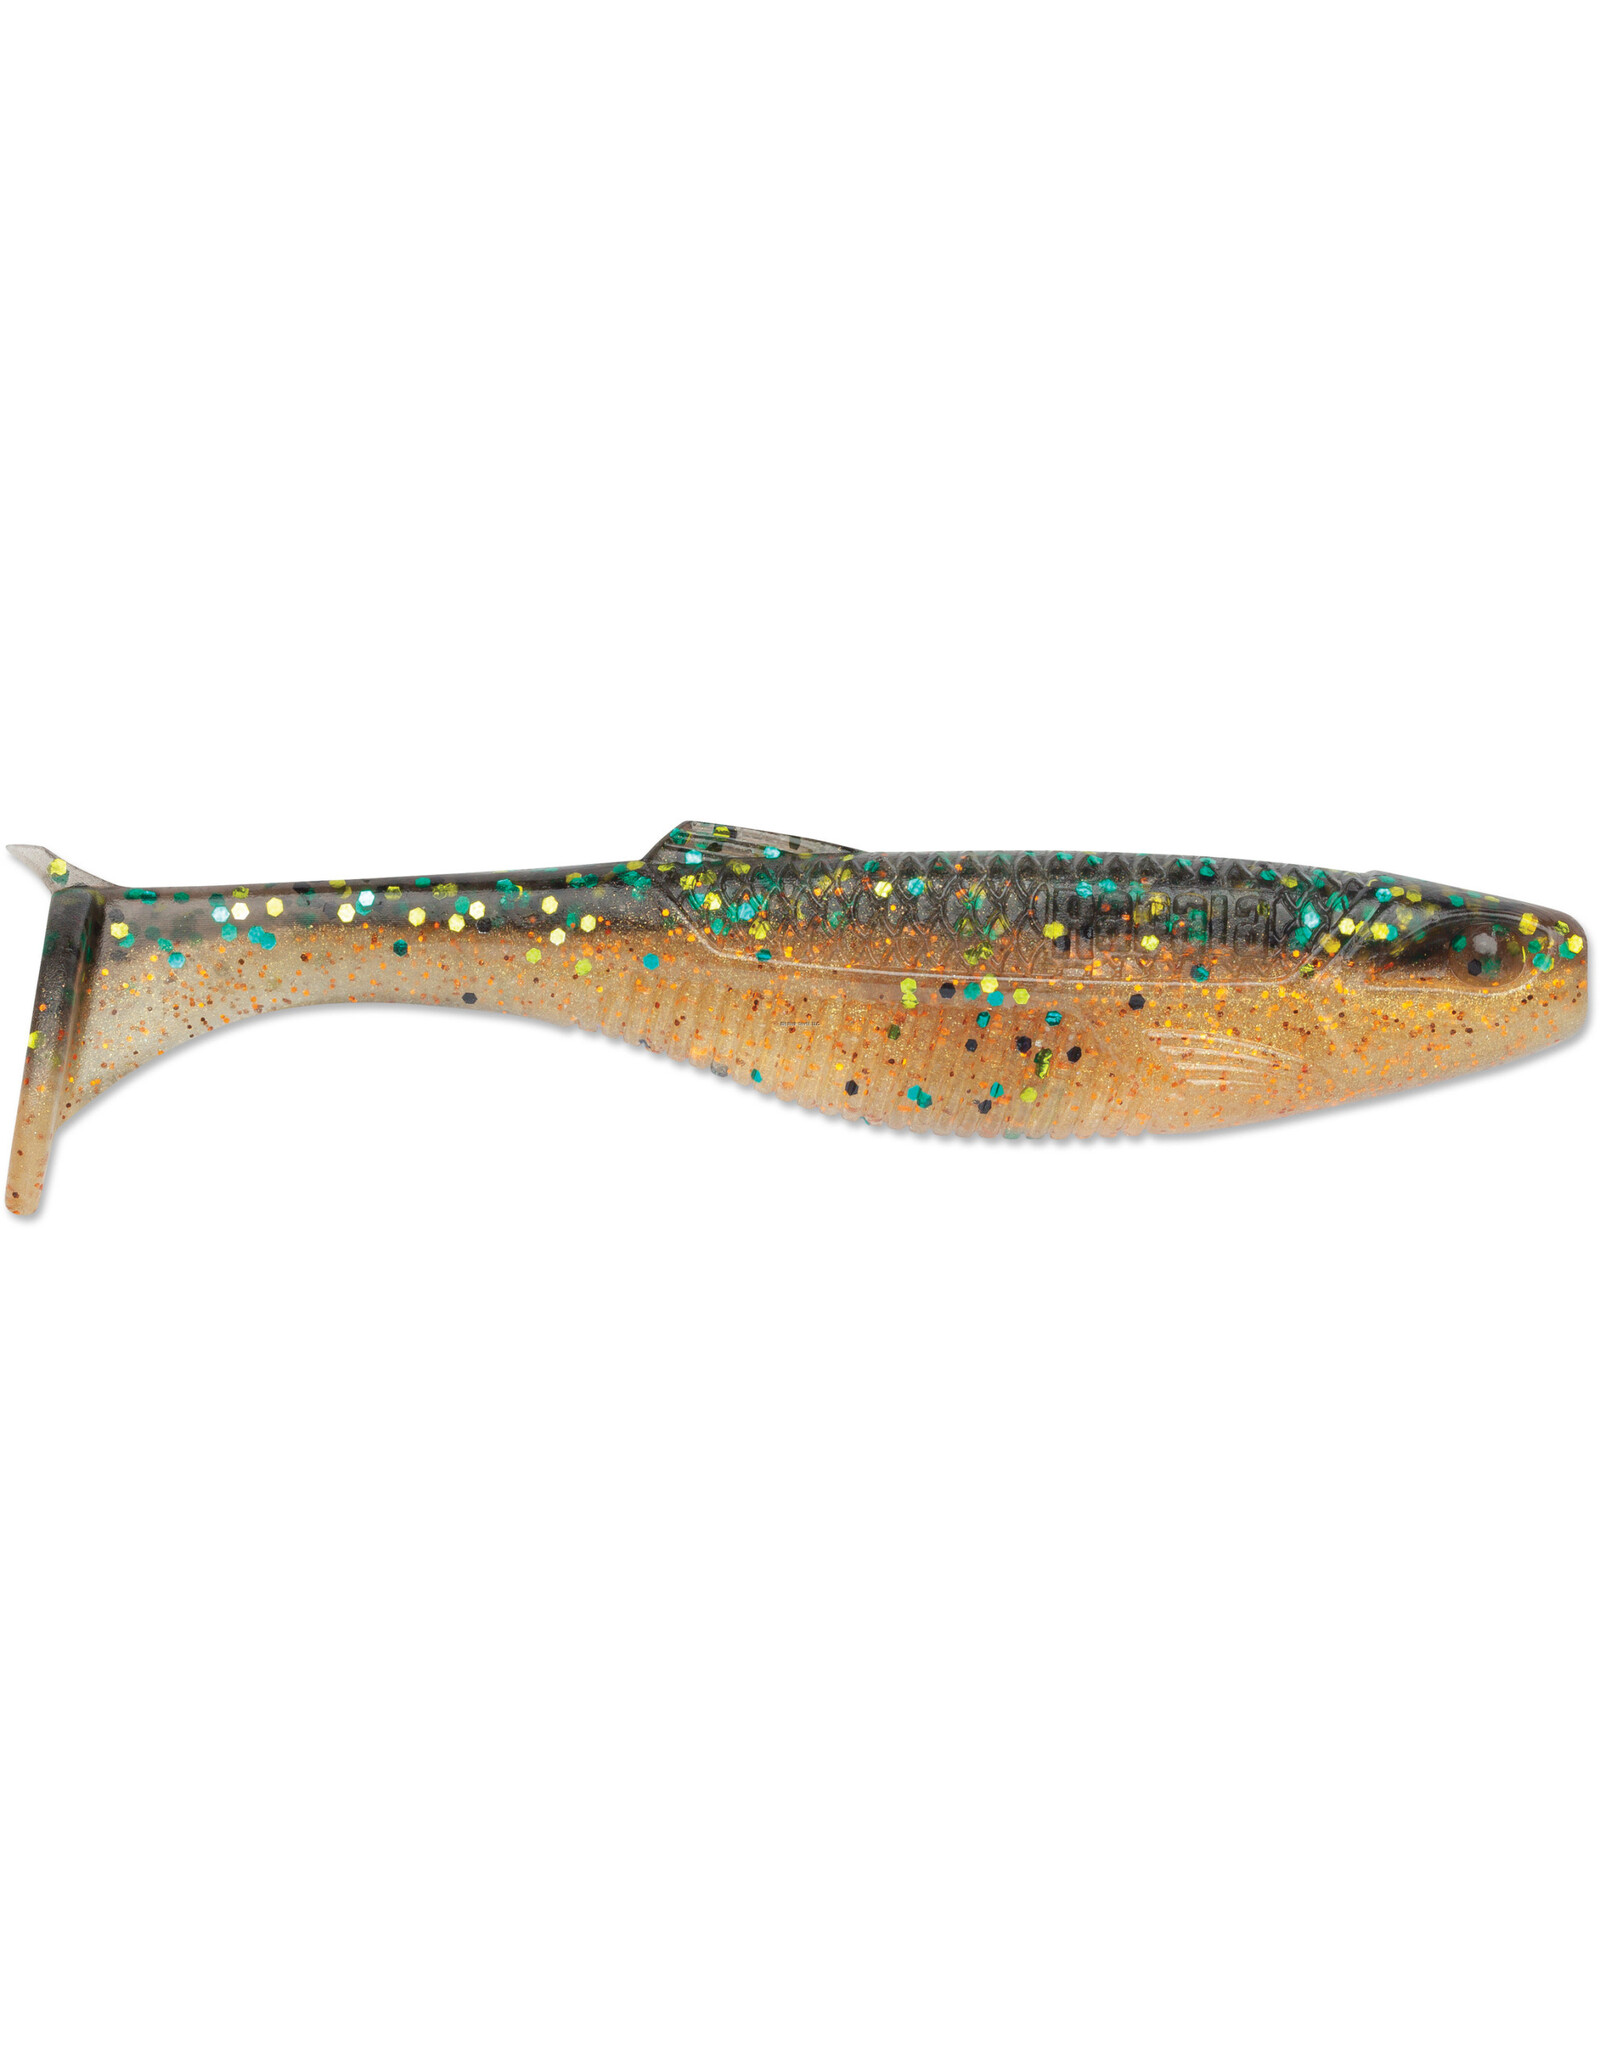 Rapala Rapala CCMYR3P CrushCity Mayor, 3", Salt/Scent Infused, 8 Per Package, Perch